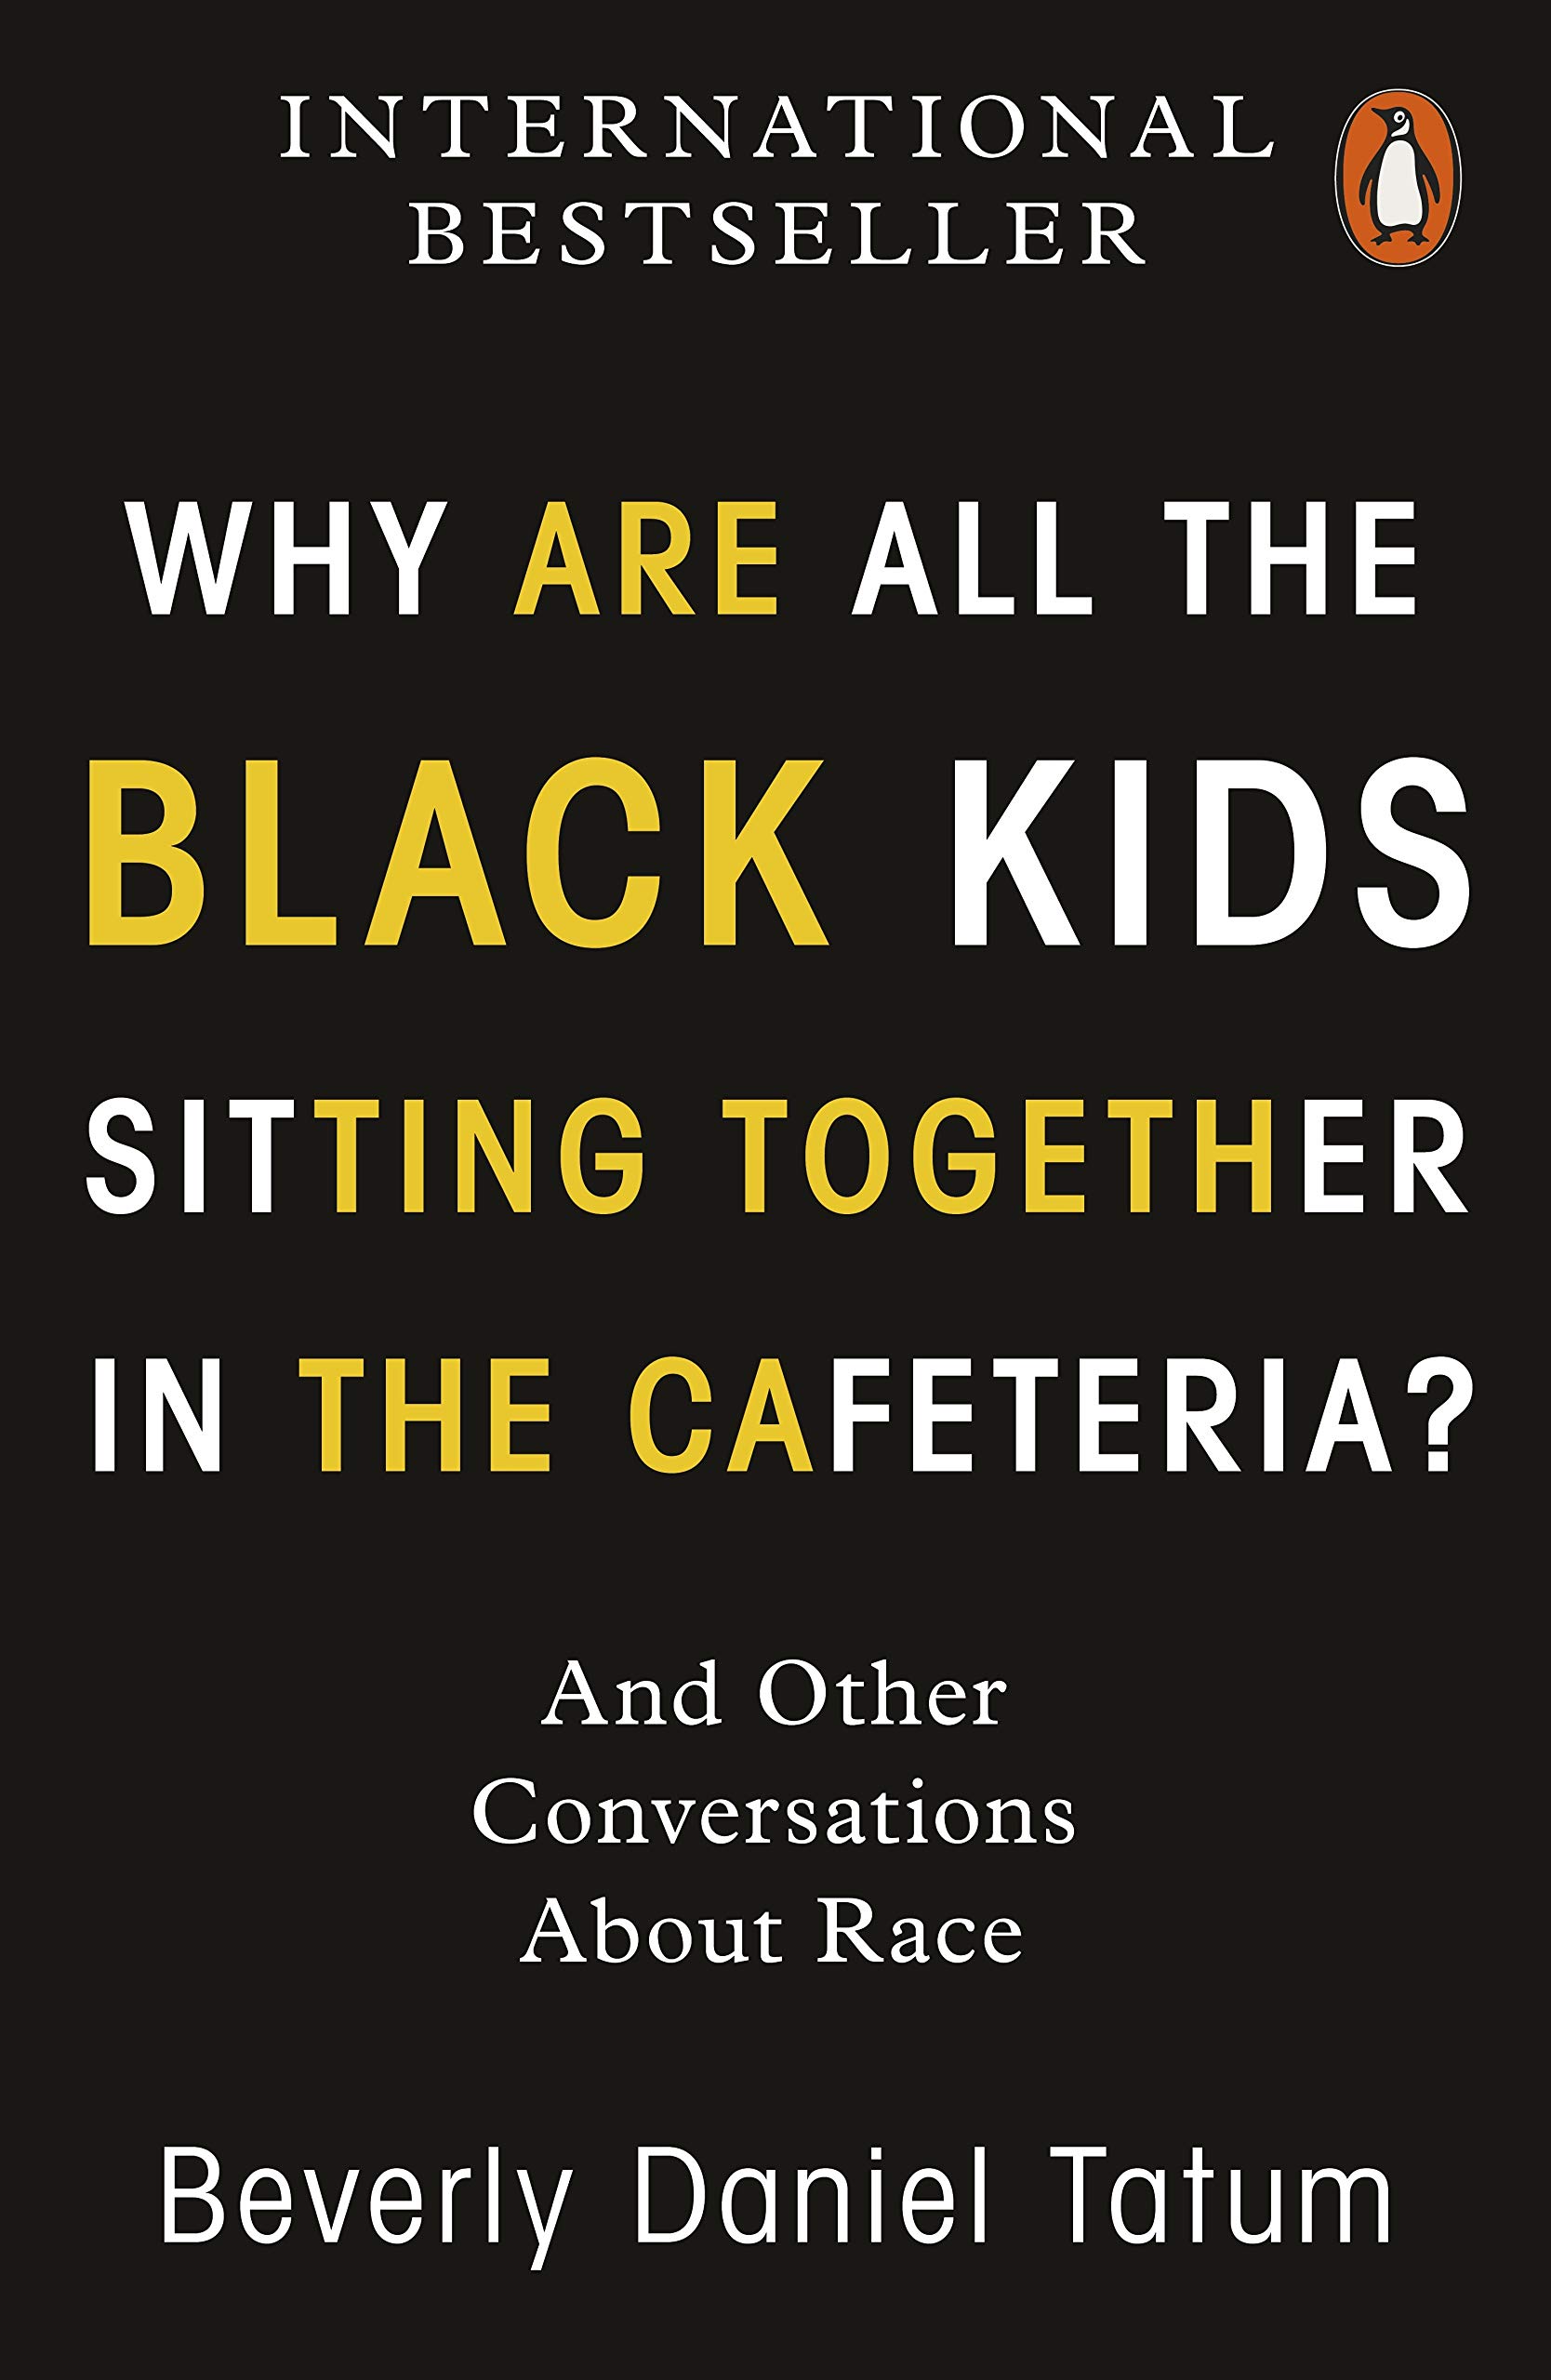 Why Are All the Black Kids Sitting Together in the Cafeteria? | Beverly Daniel Tatum